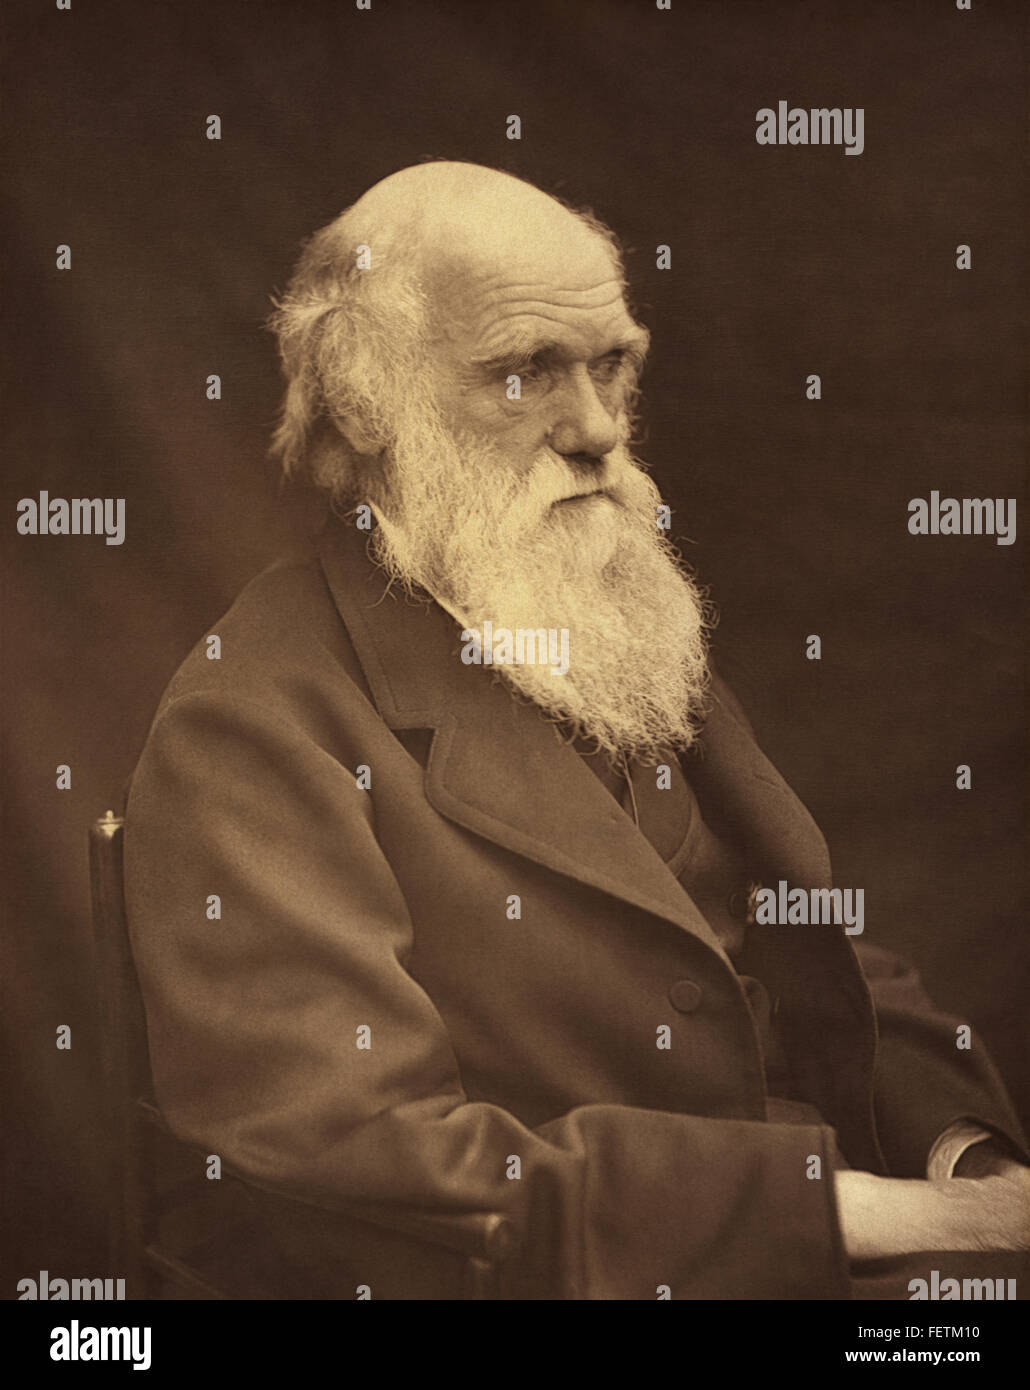 Charles Robert Darwin, evolutionist and author of The Origin of Species, in an 1878 photograph by Leonard Darwin, Charles Darwin's son. Stock Photo